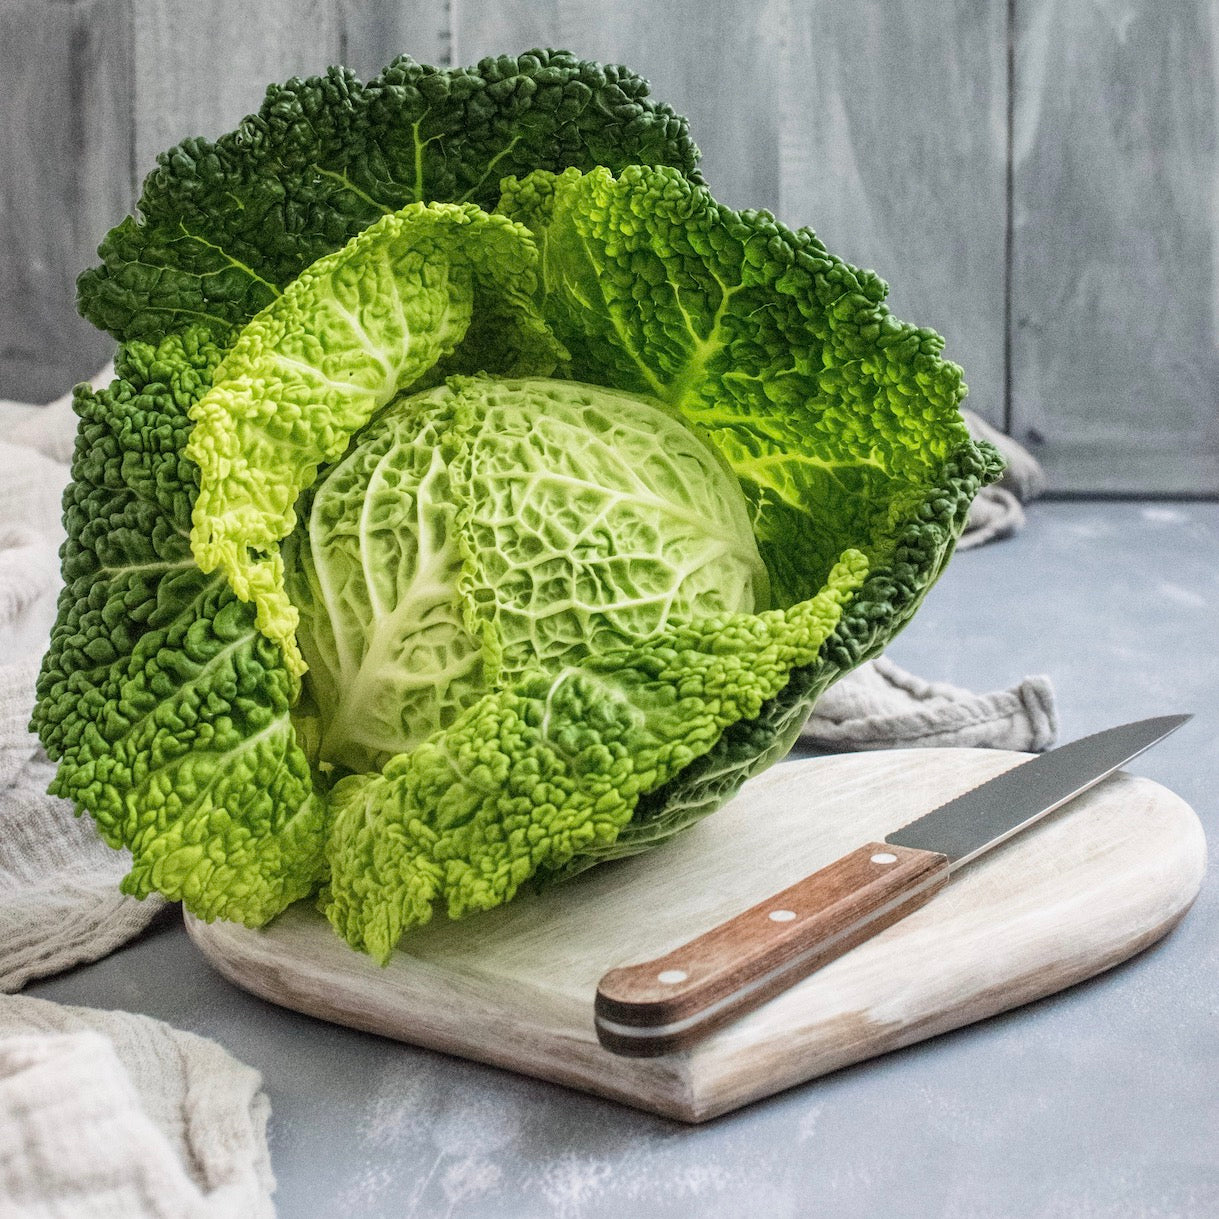 cabbage-savoy-online-grocery-supermarket-delivery-singapore